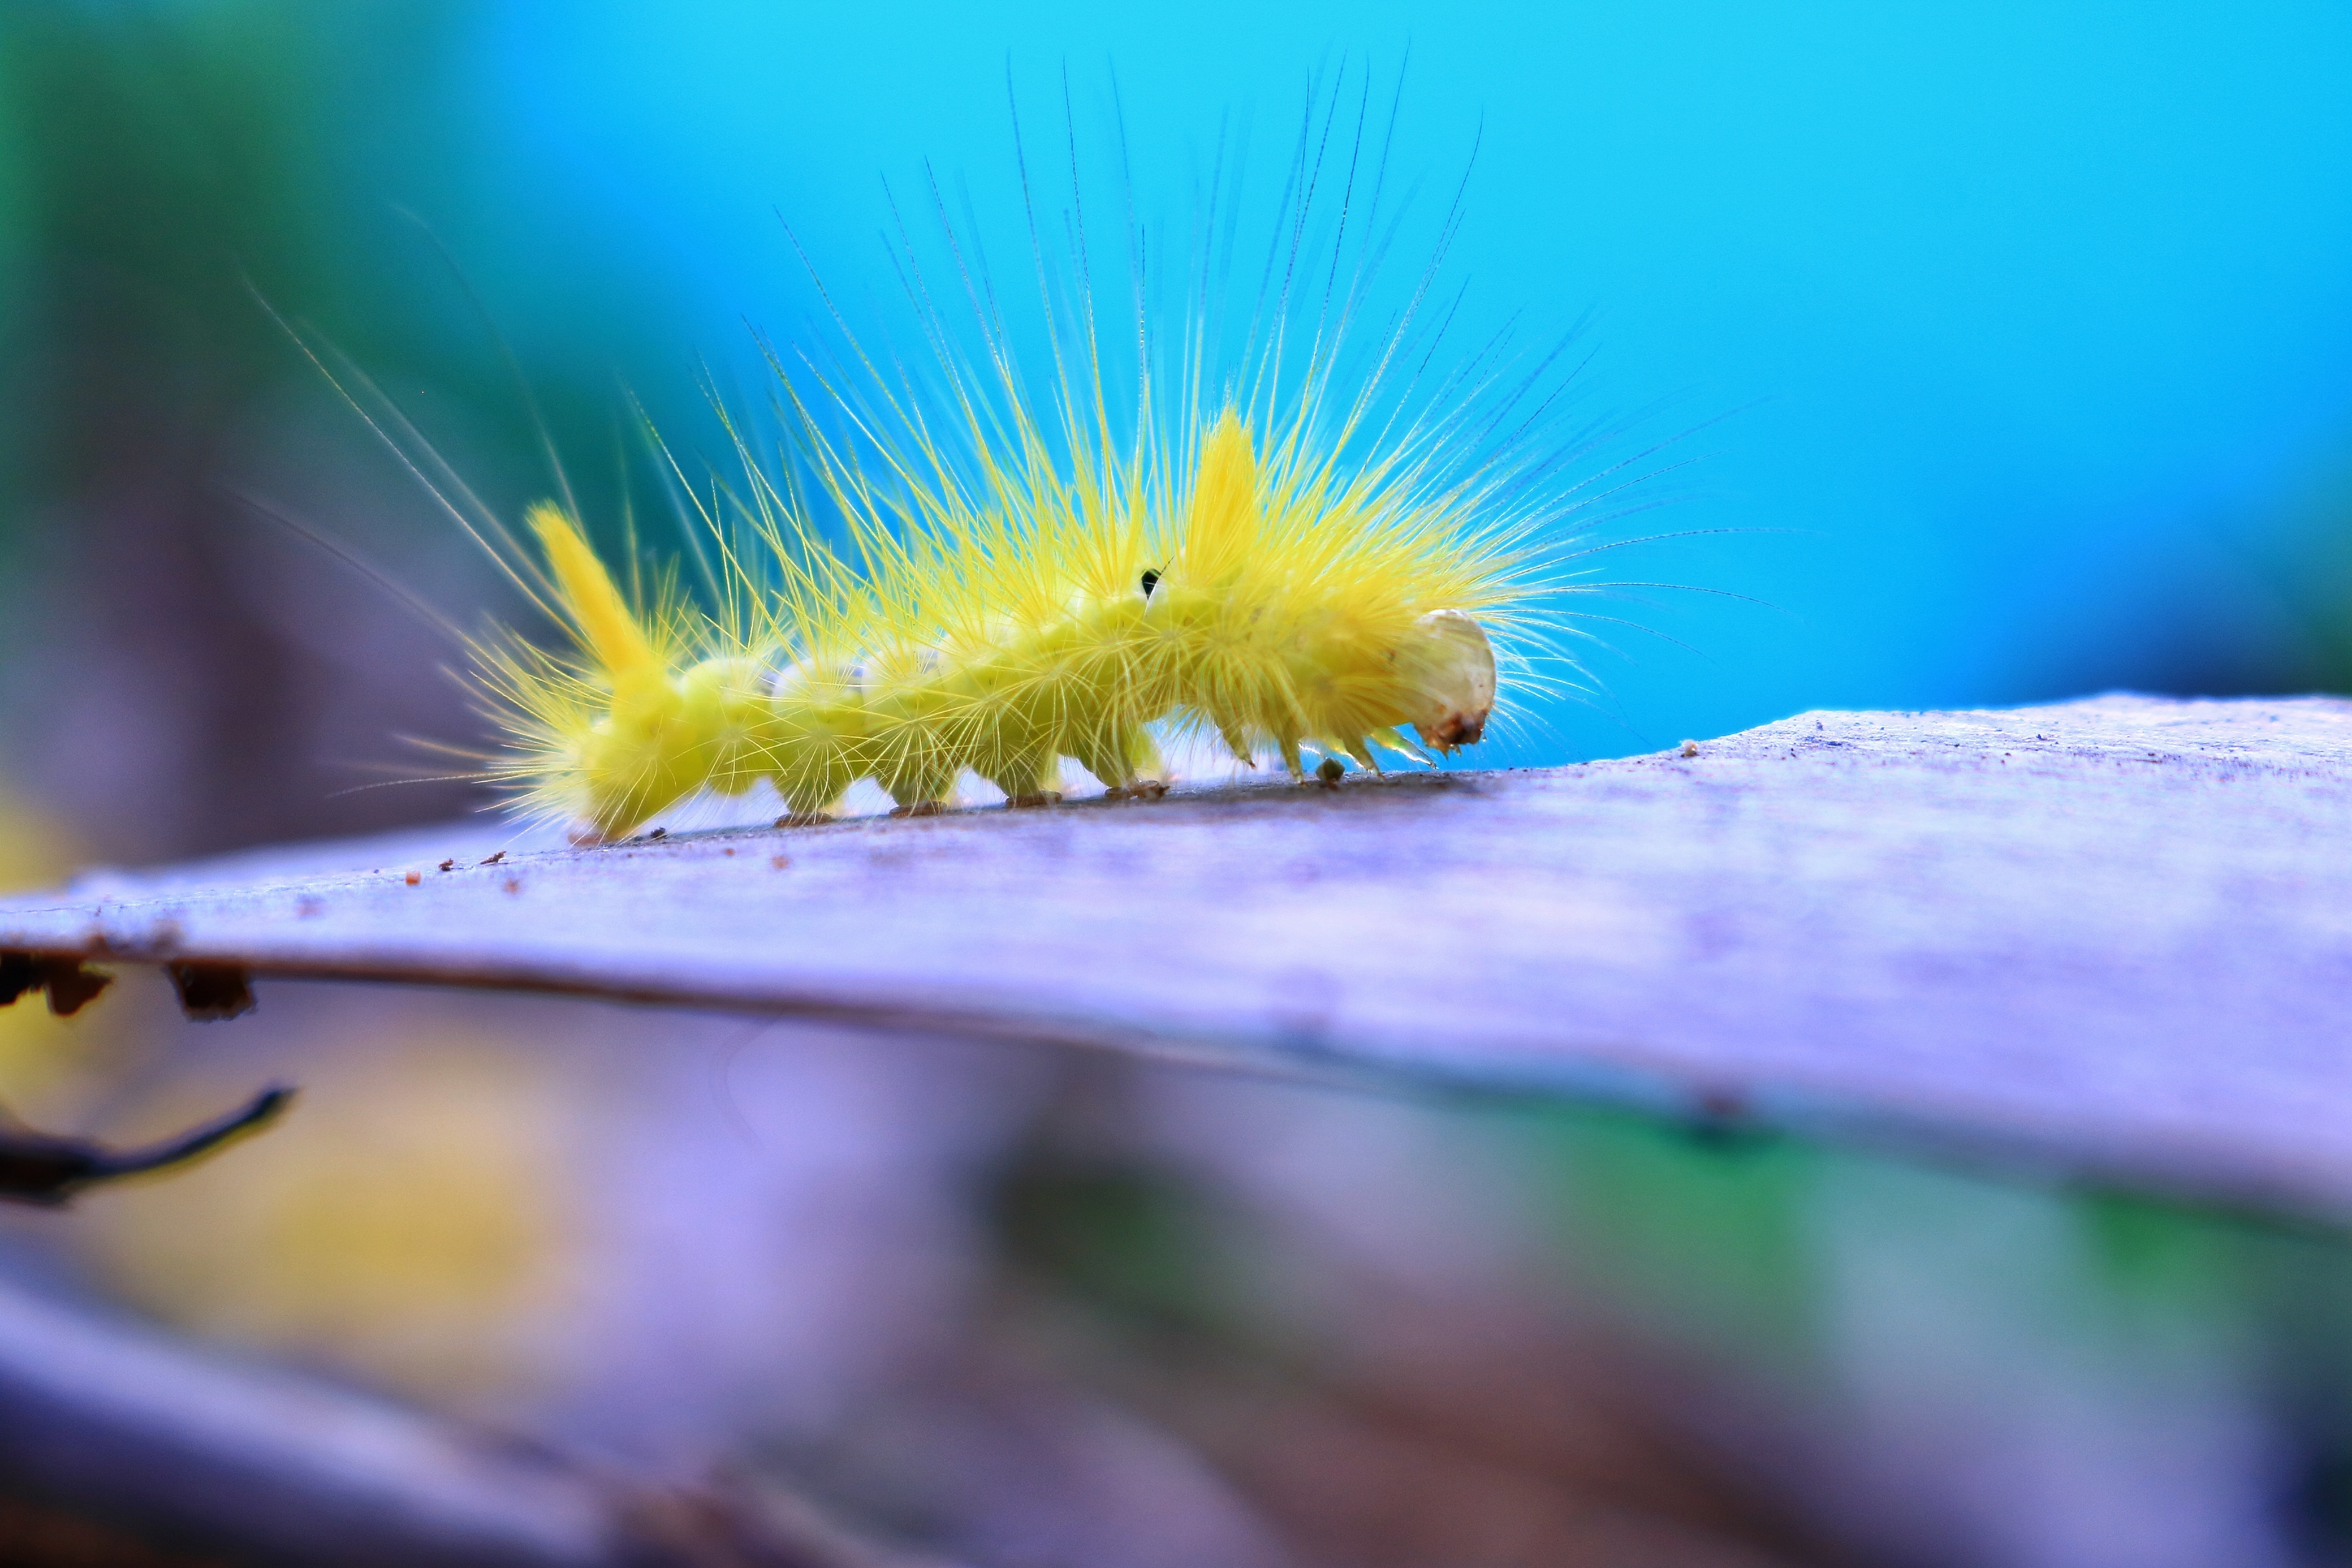 Wallpapers caterpillar macro insects on the desktop